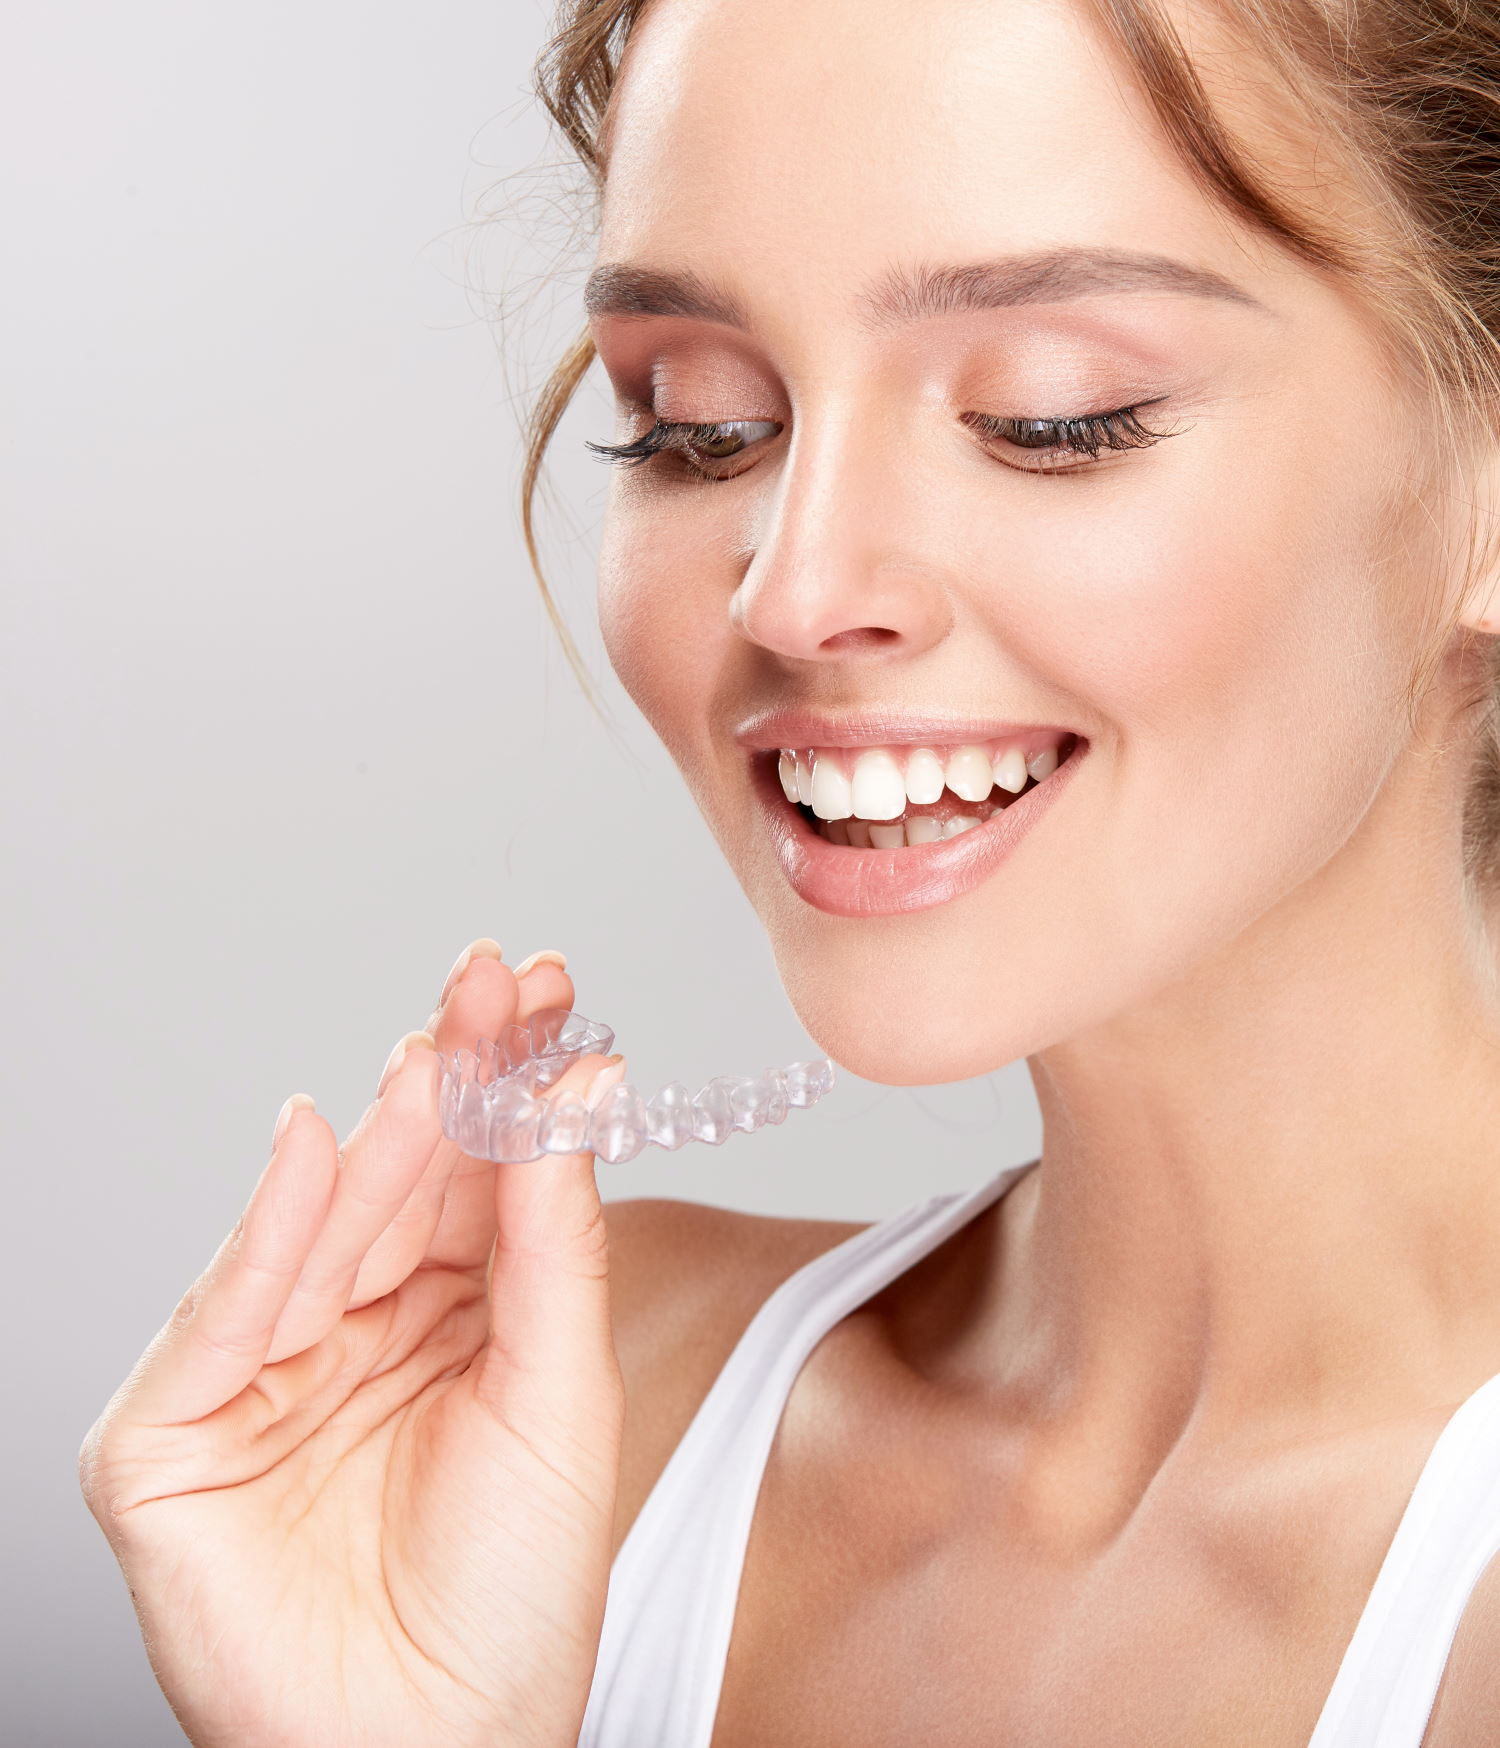 Invisalign invisible braces in the City of London